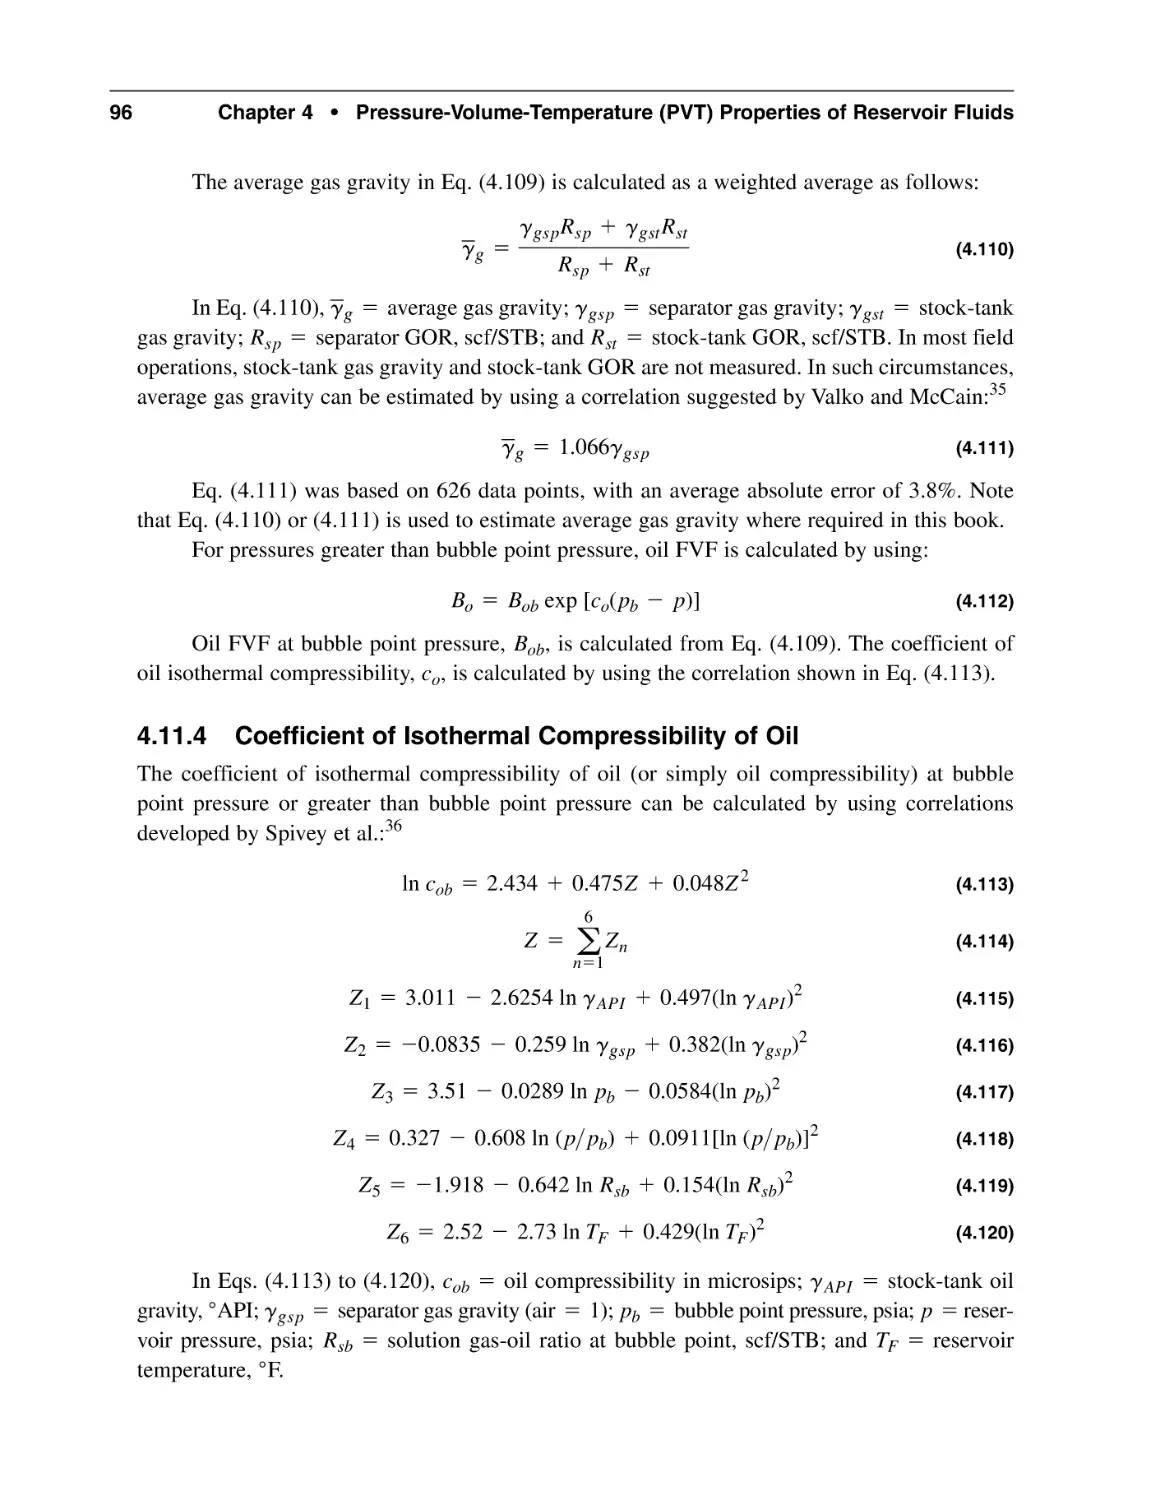 4.11.4 Coefficient of Isothermal Compressibility of Oil